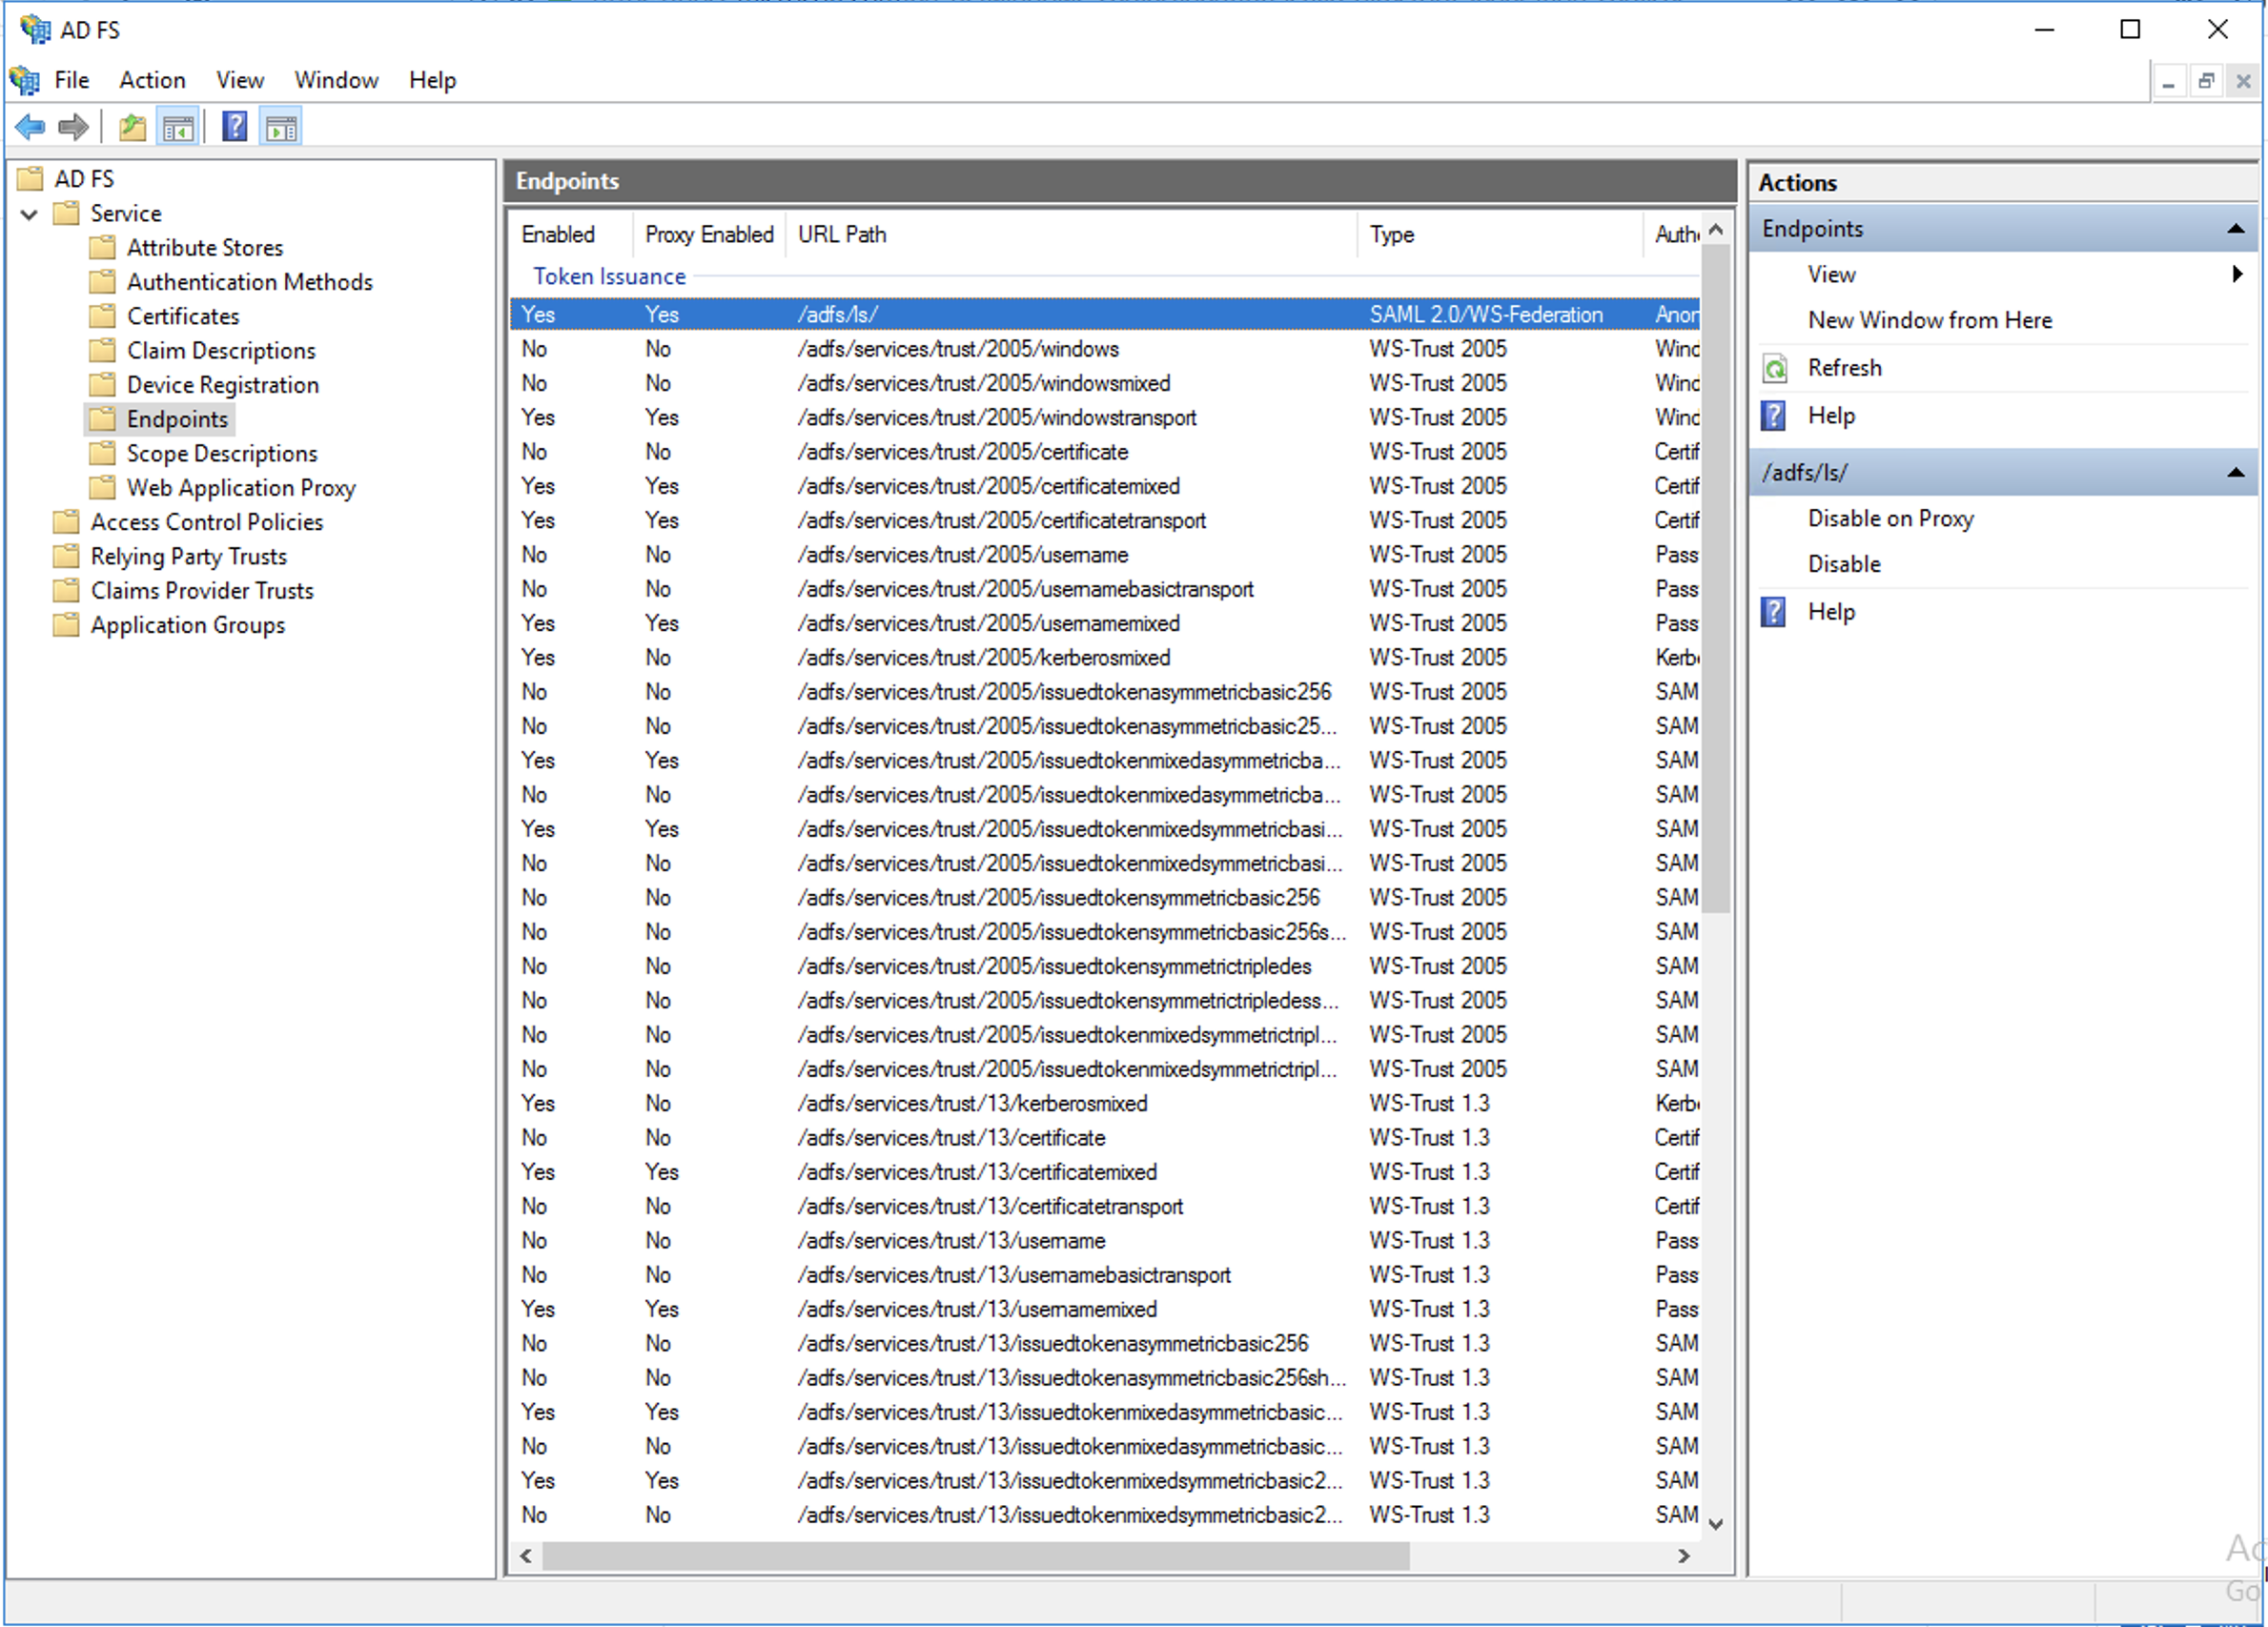 A screen of all the endpoints under the AD FS service directory, including the SAML 2.0/WS-Federation type